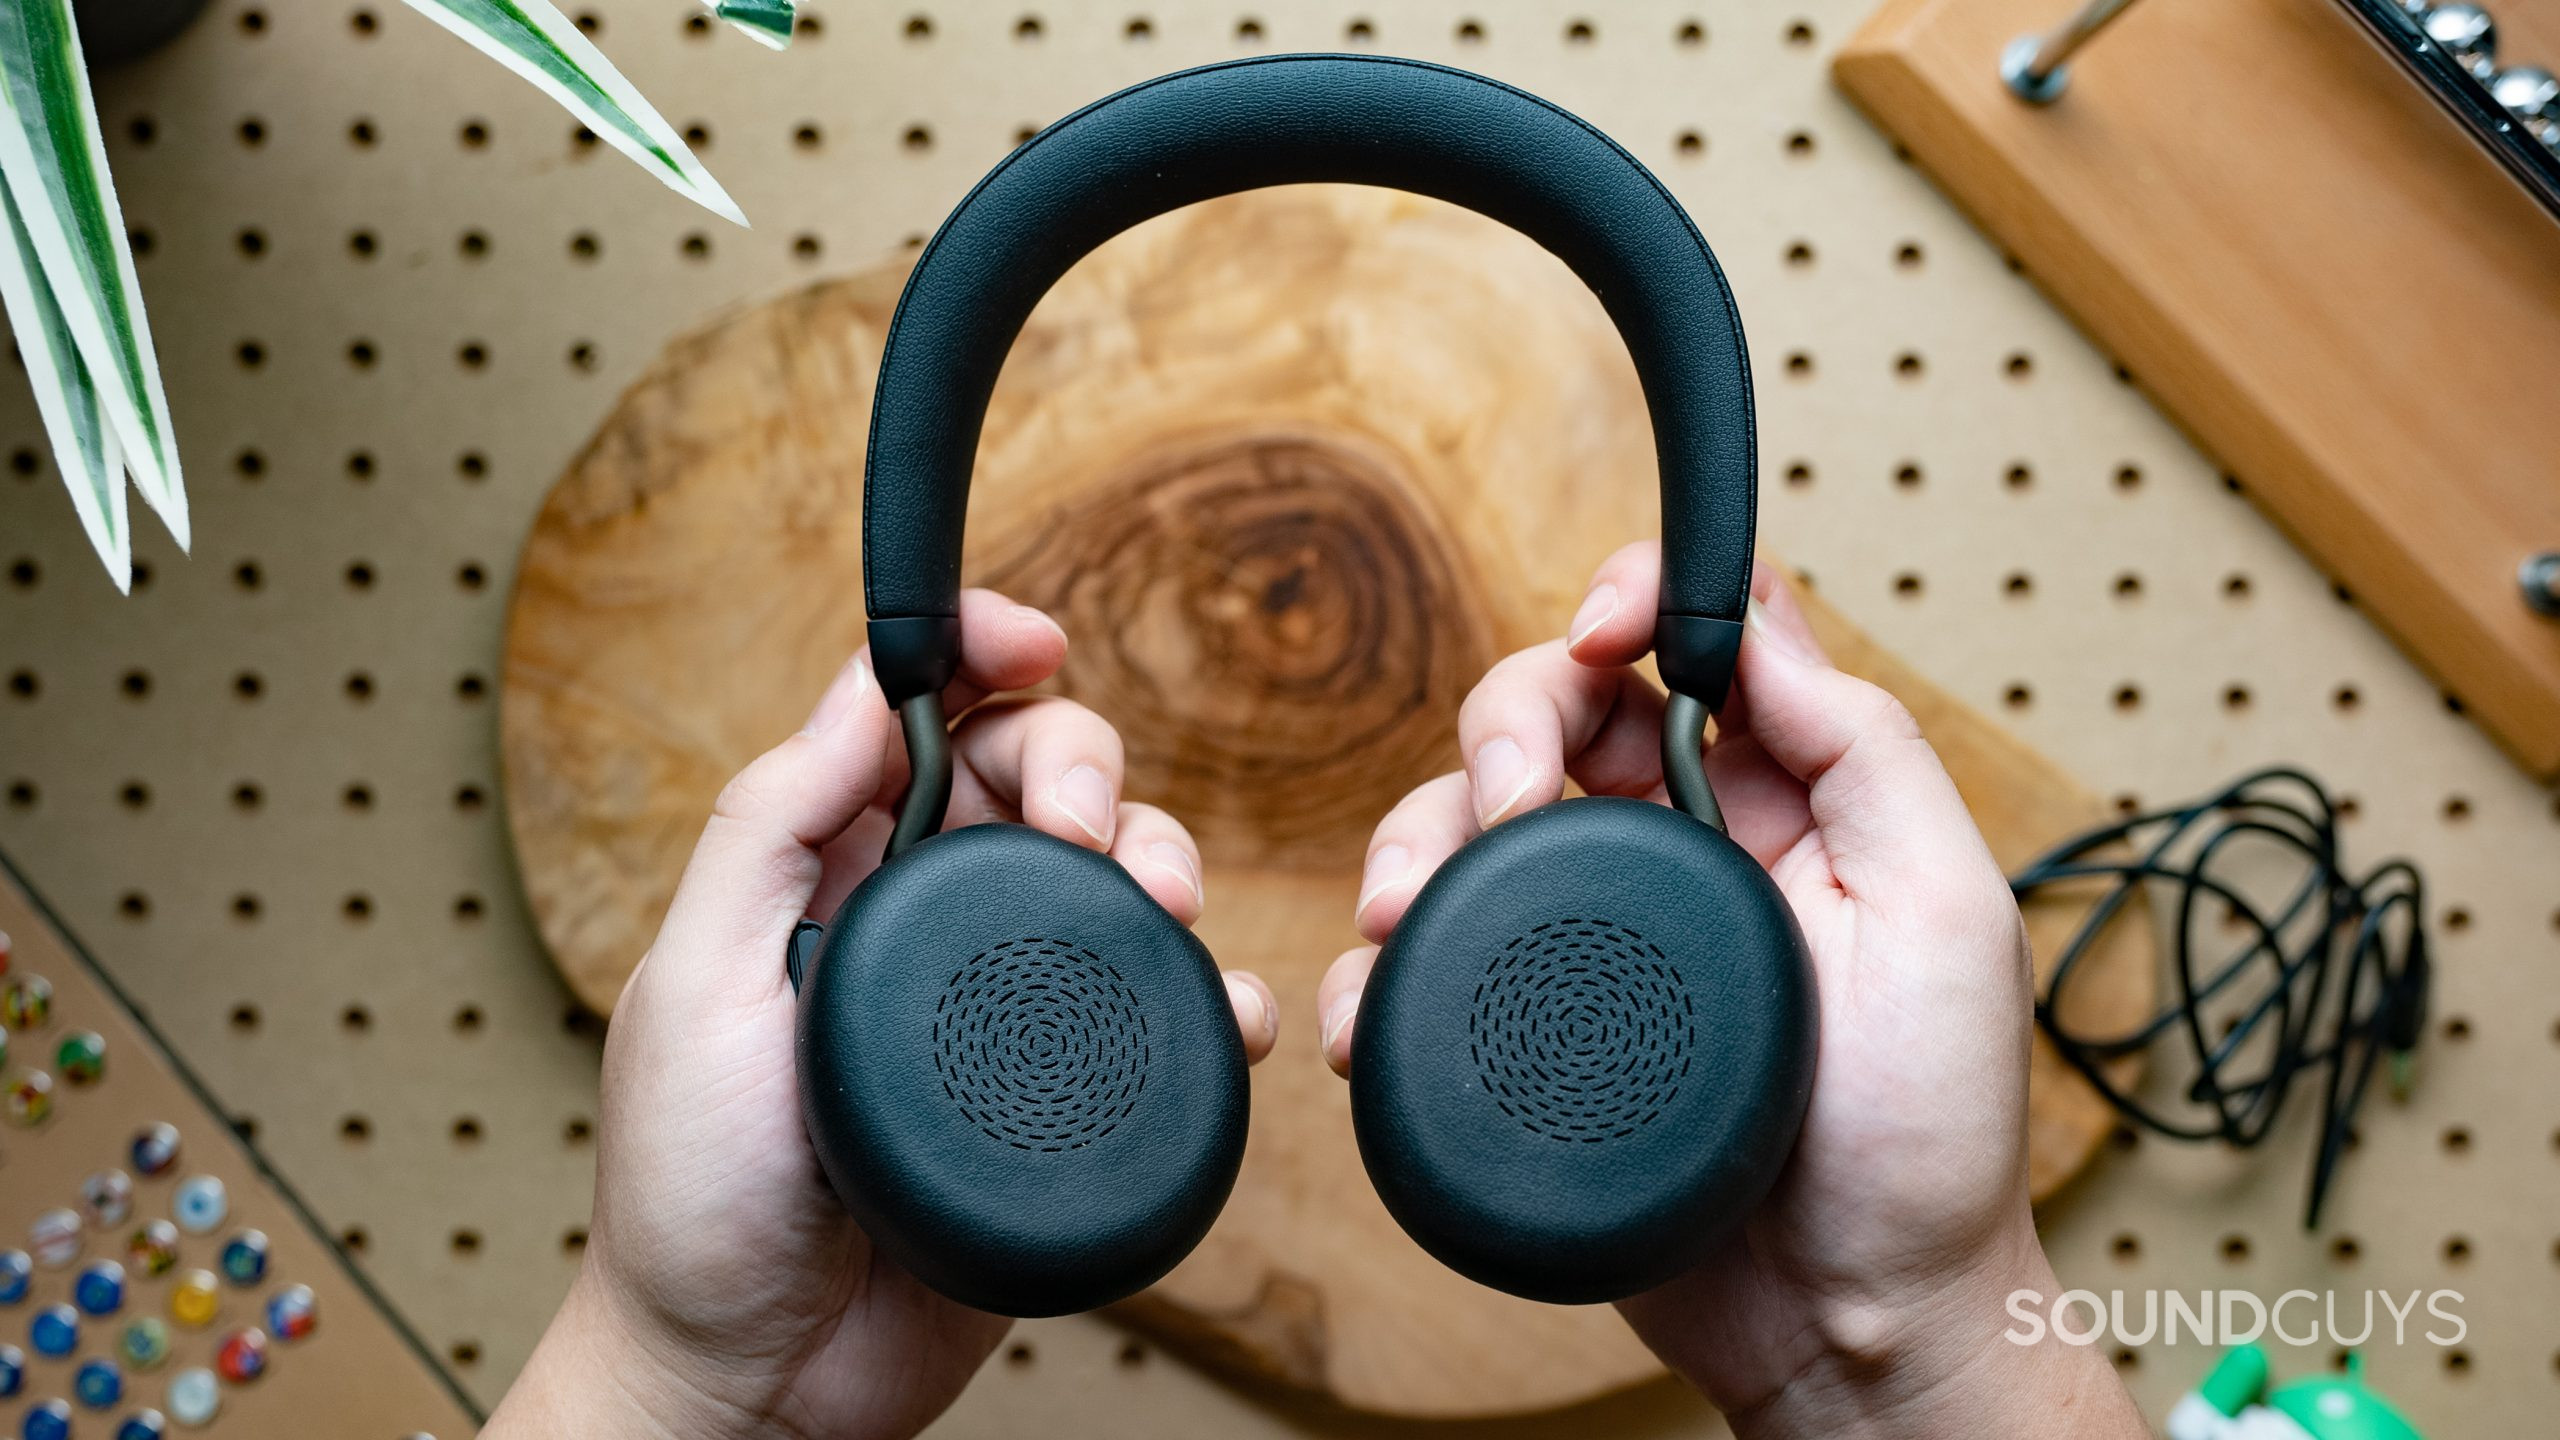 The Jabra Evolve2 75 headset being held firmly with two hands, with the pads of the earcups facing the viewer.